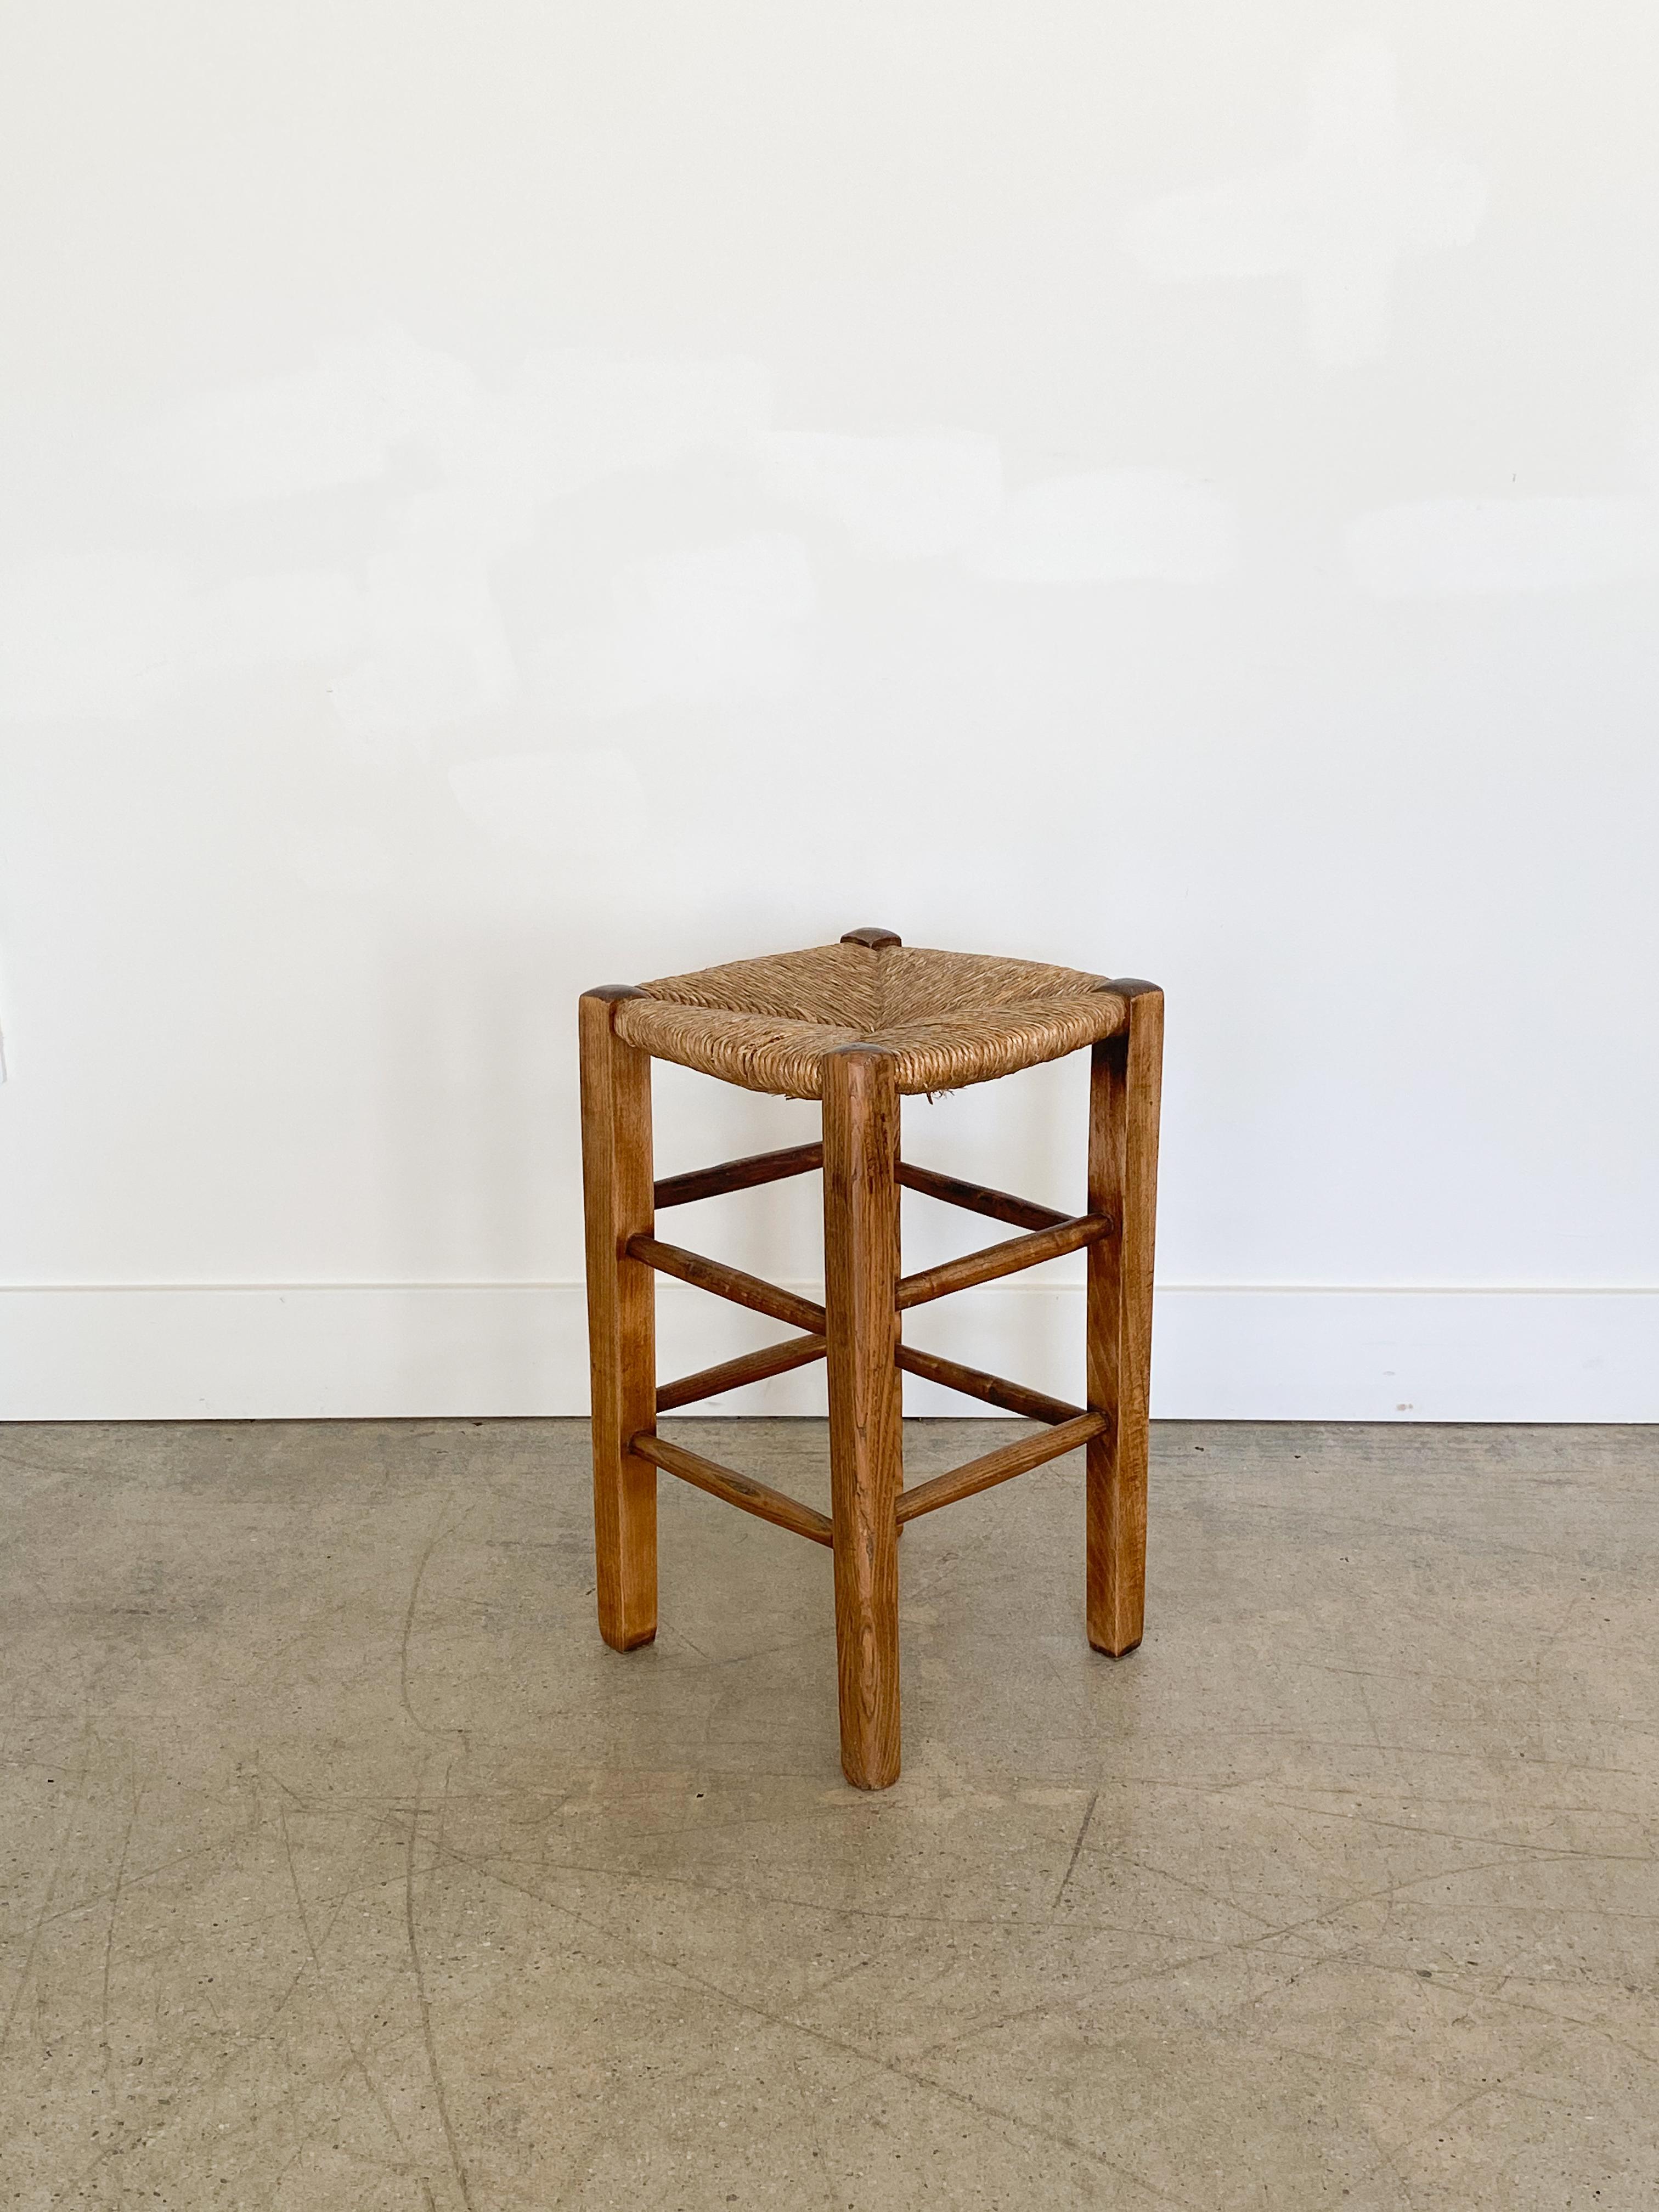 French wood and woven rush stool in the style of Charlotte Perriand.